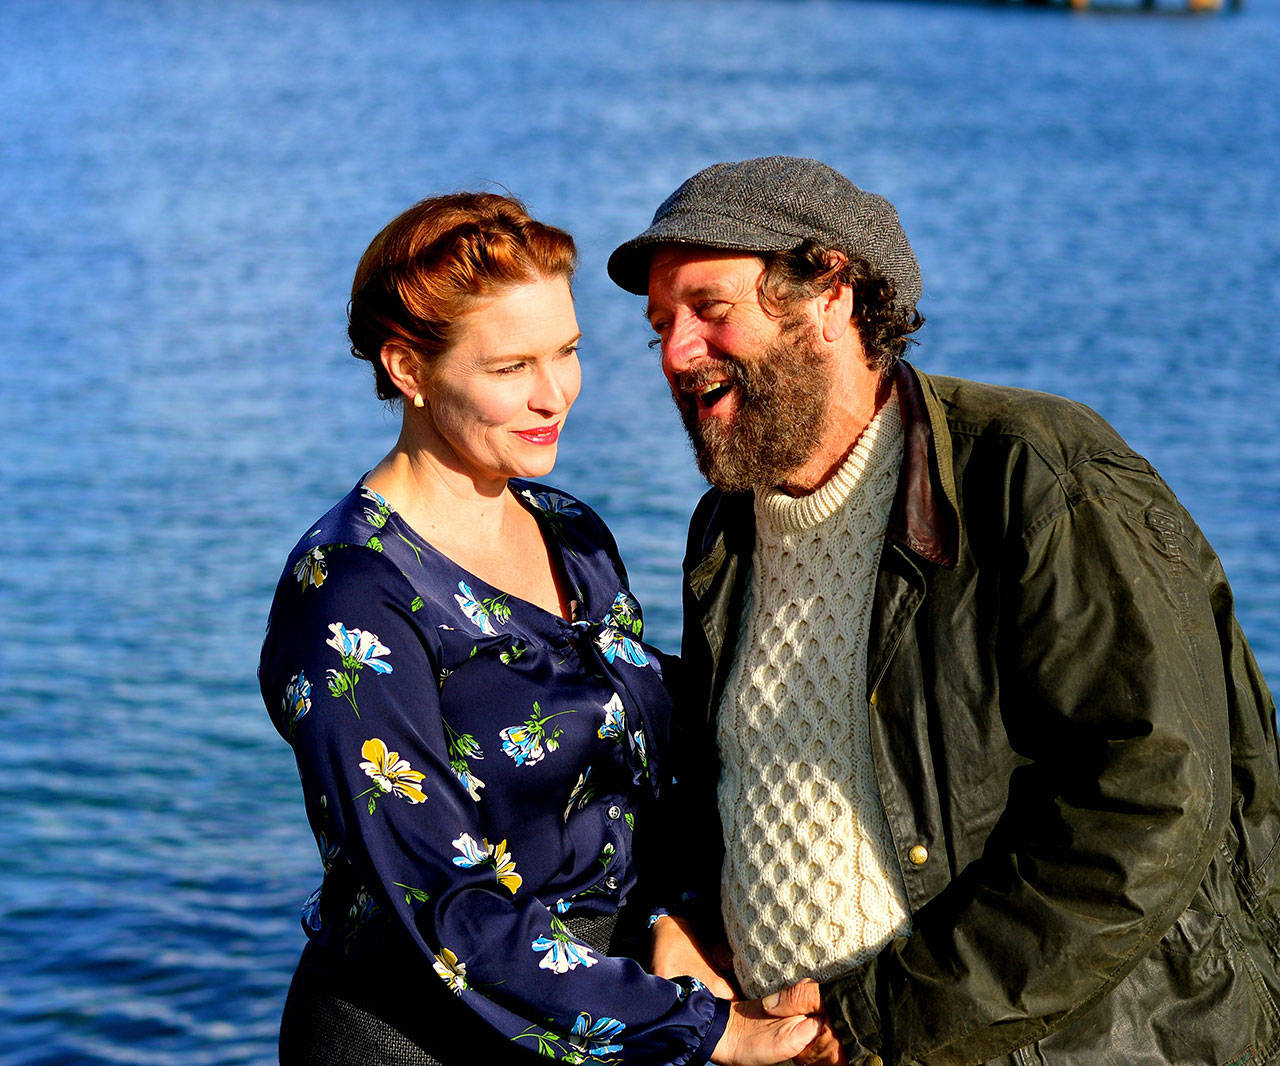 Timothea (Crystal Eisele) and Colm (Eric Ray Anderson) come together from different backgrounds in ‘Sea Marks,’ the romantic drama at Port Townsend’s Key City Public Theatre. (Diane Urbani de la Paz/for Peninsula Daily News)